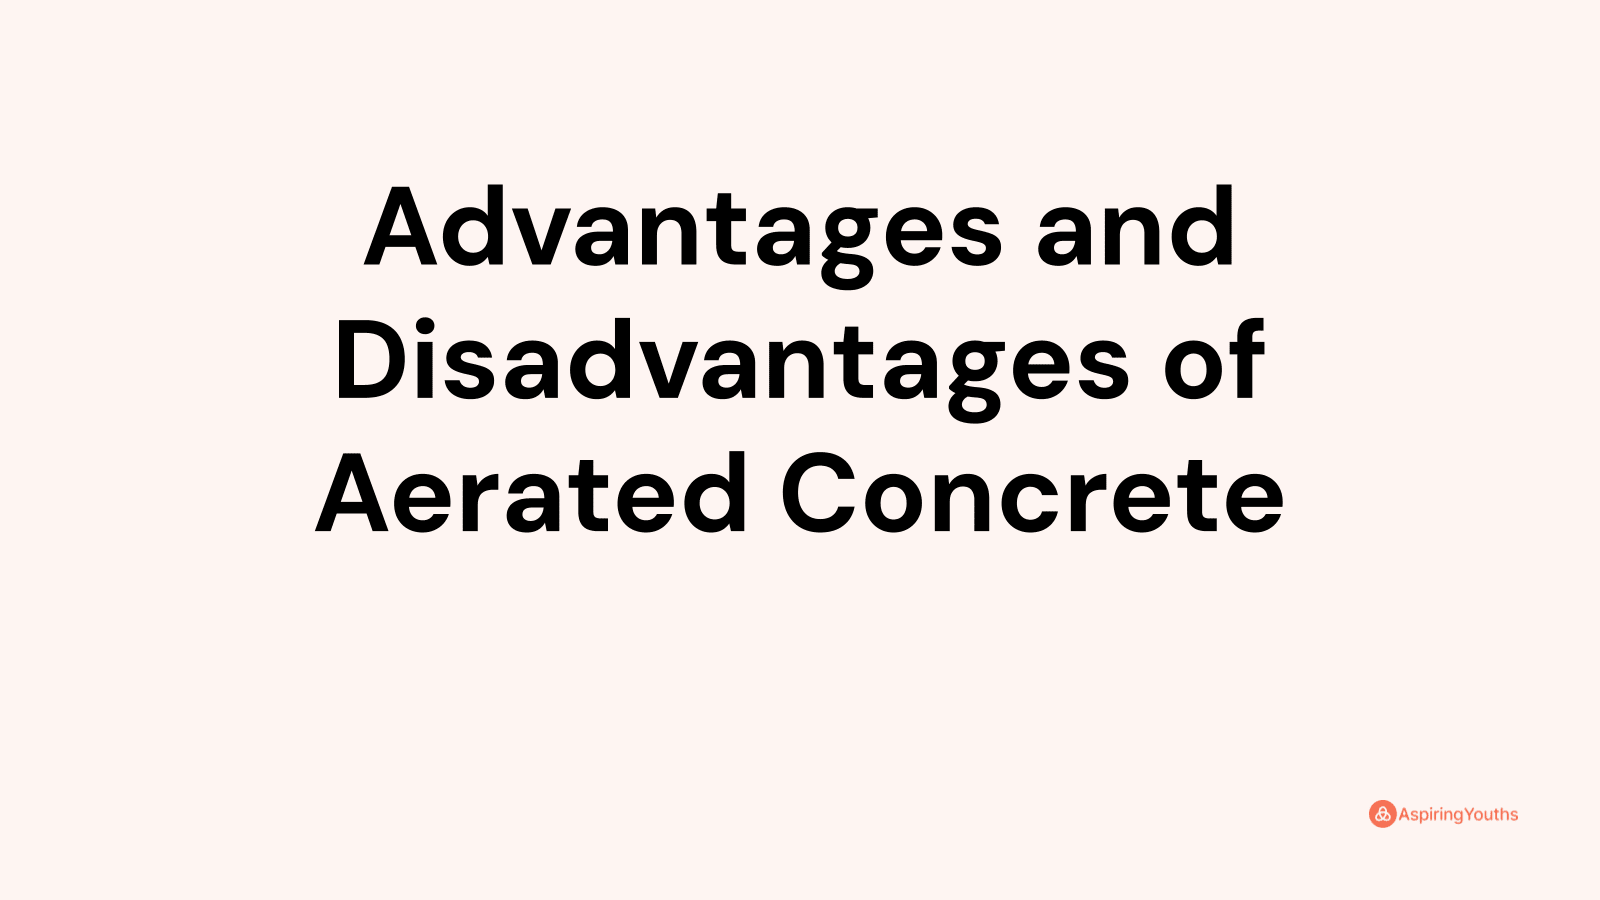 Advantages and disadvantages of Aerated Concrete